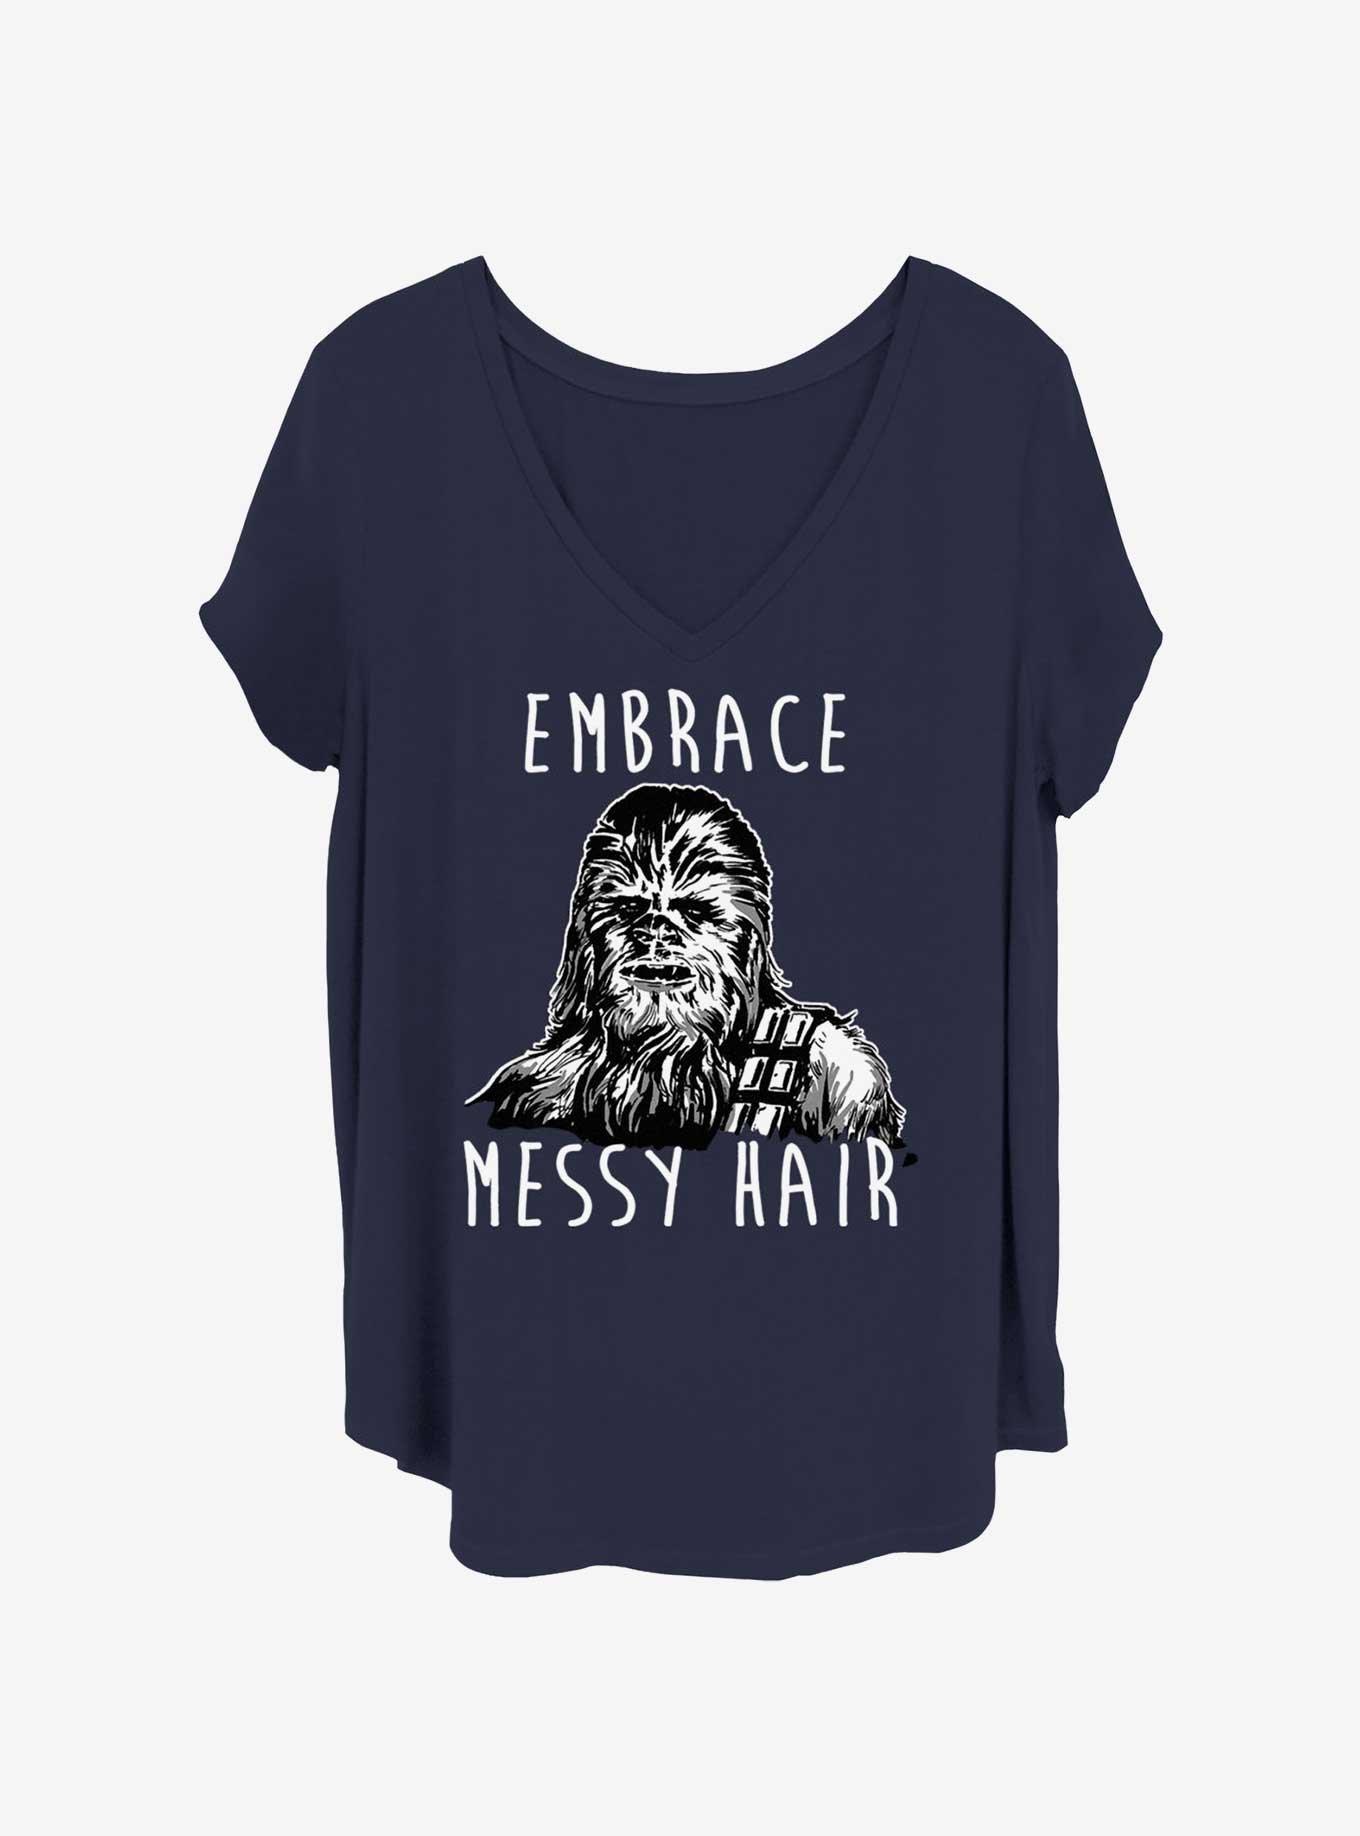 Star Wars Chewie Embrace Messy Hair Womens T-Shirt Plus Size, NAVY, hi-res